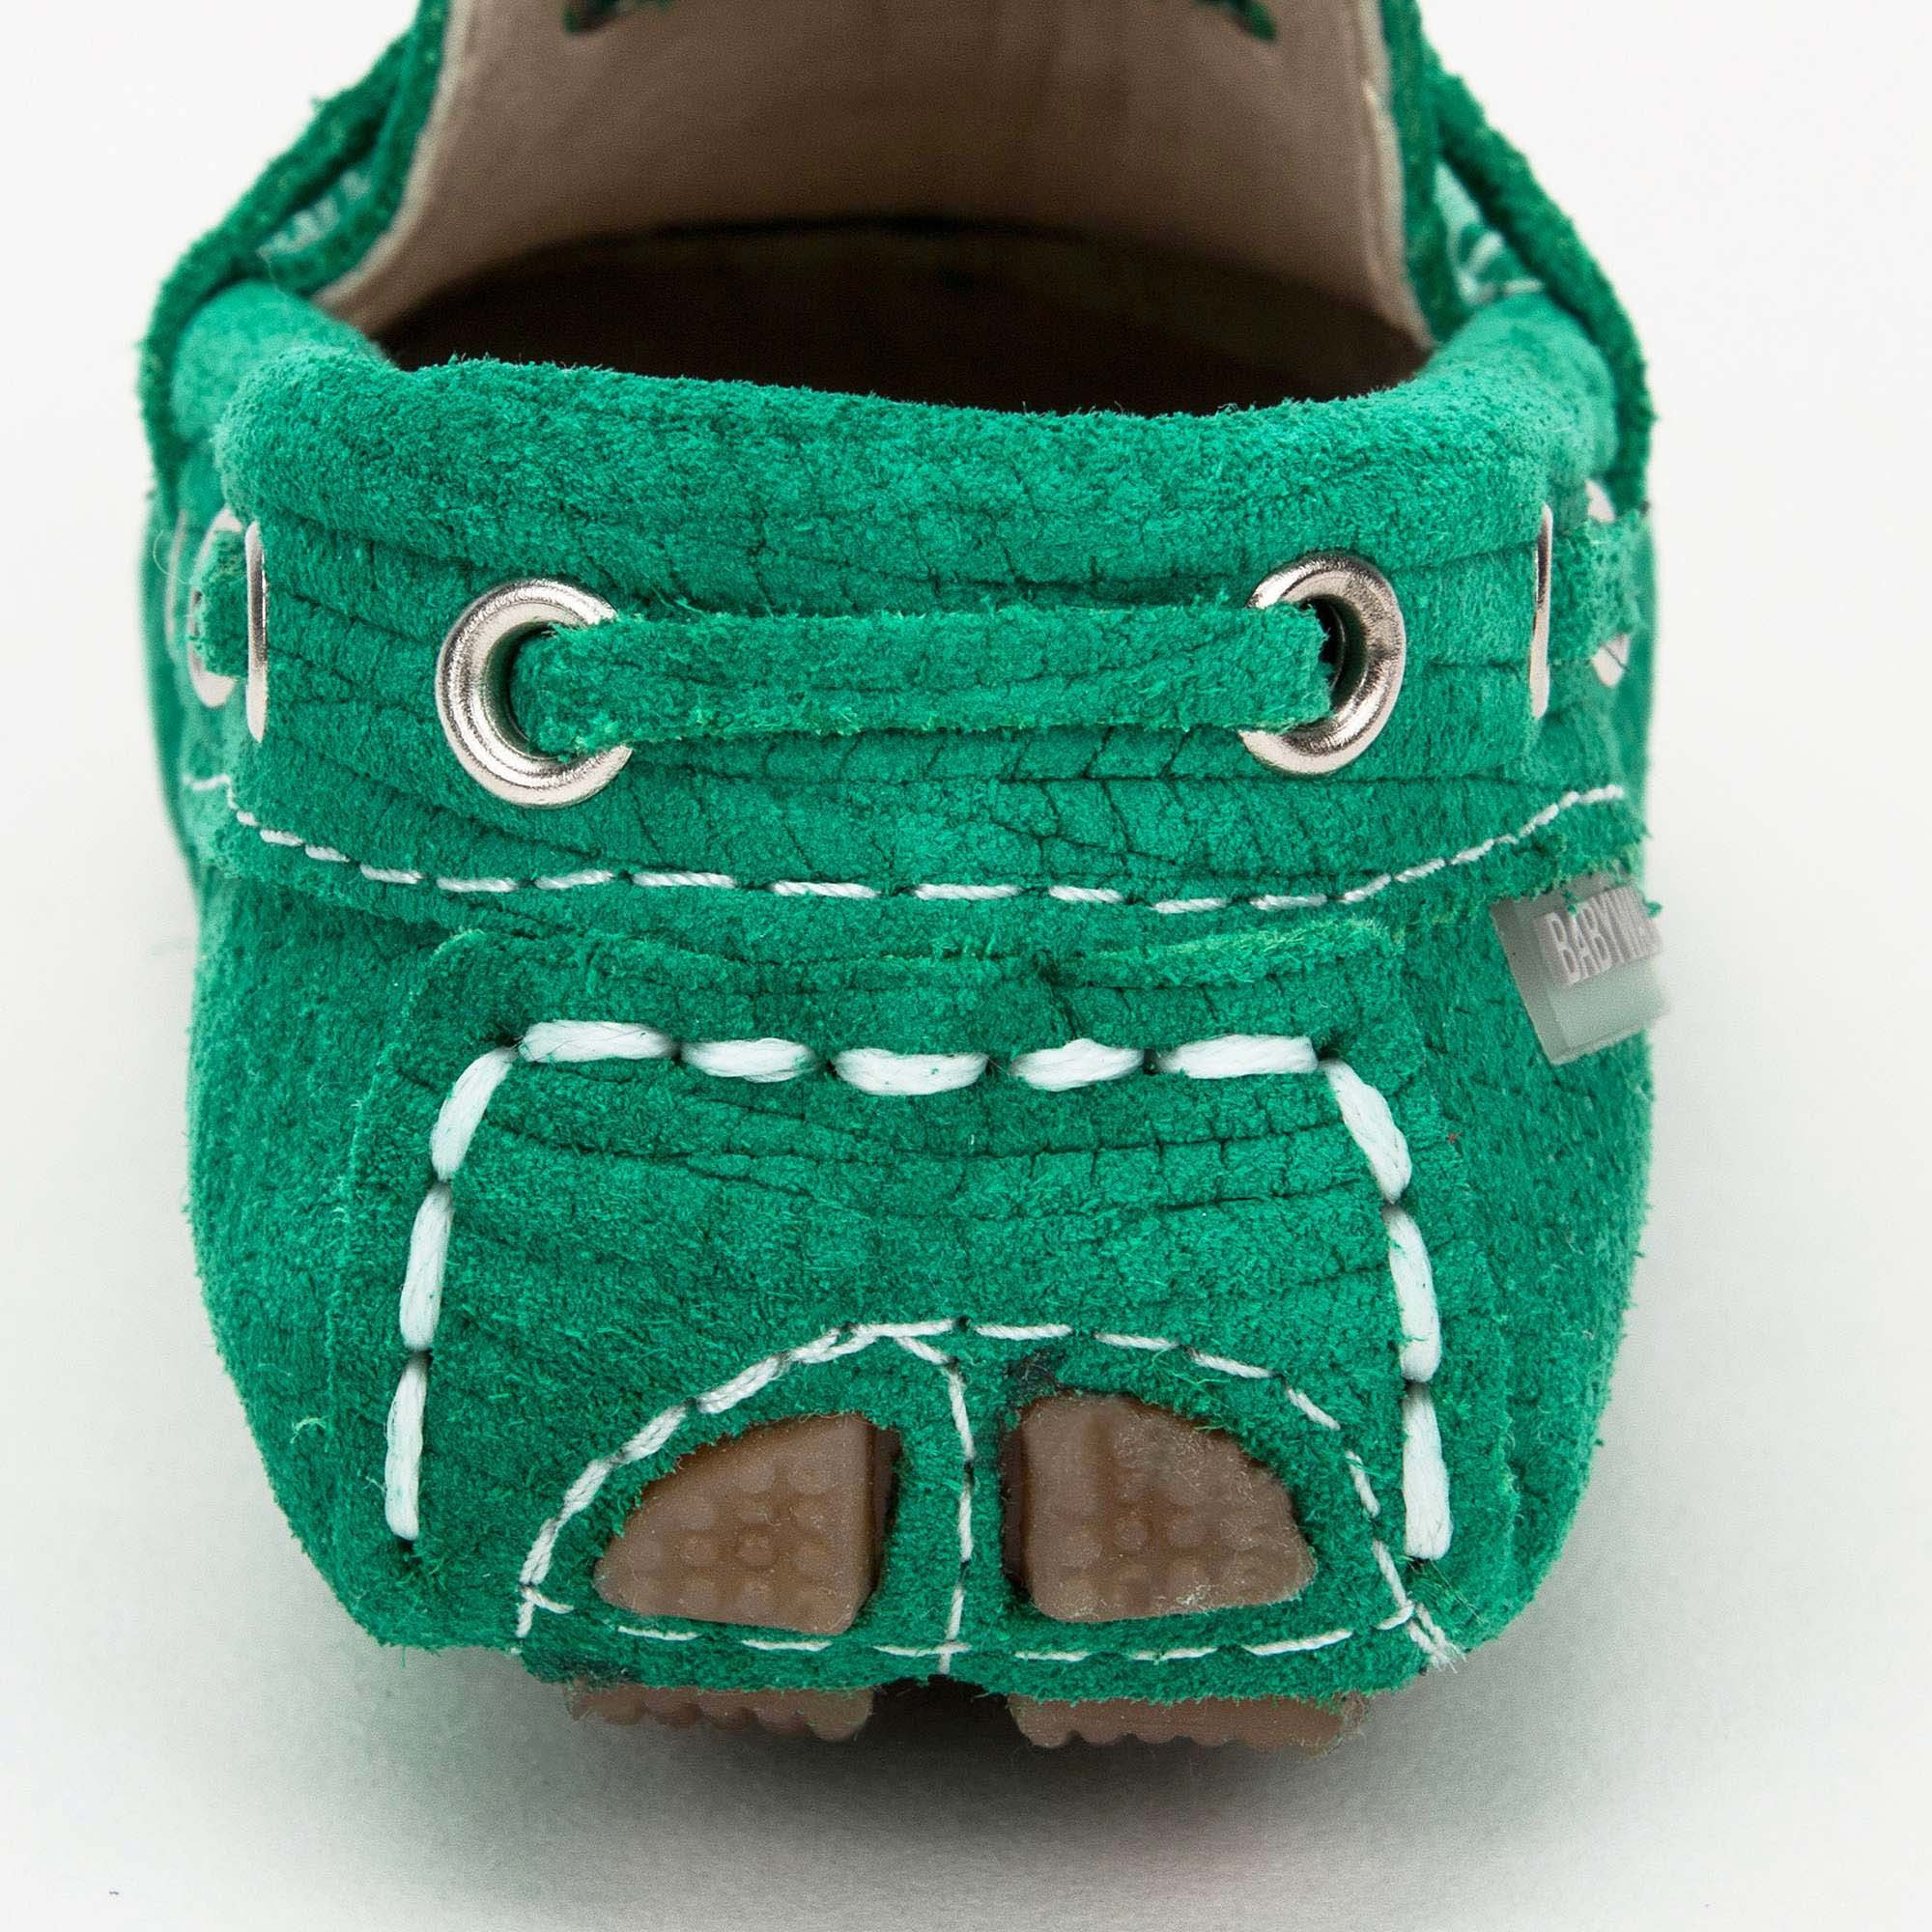 Boys & Girls Green Suede Leather Tasselled Loafers